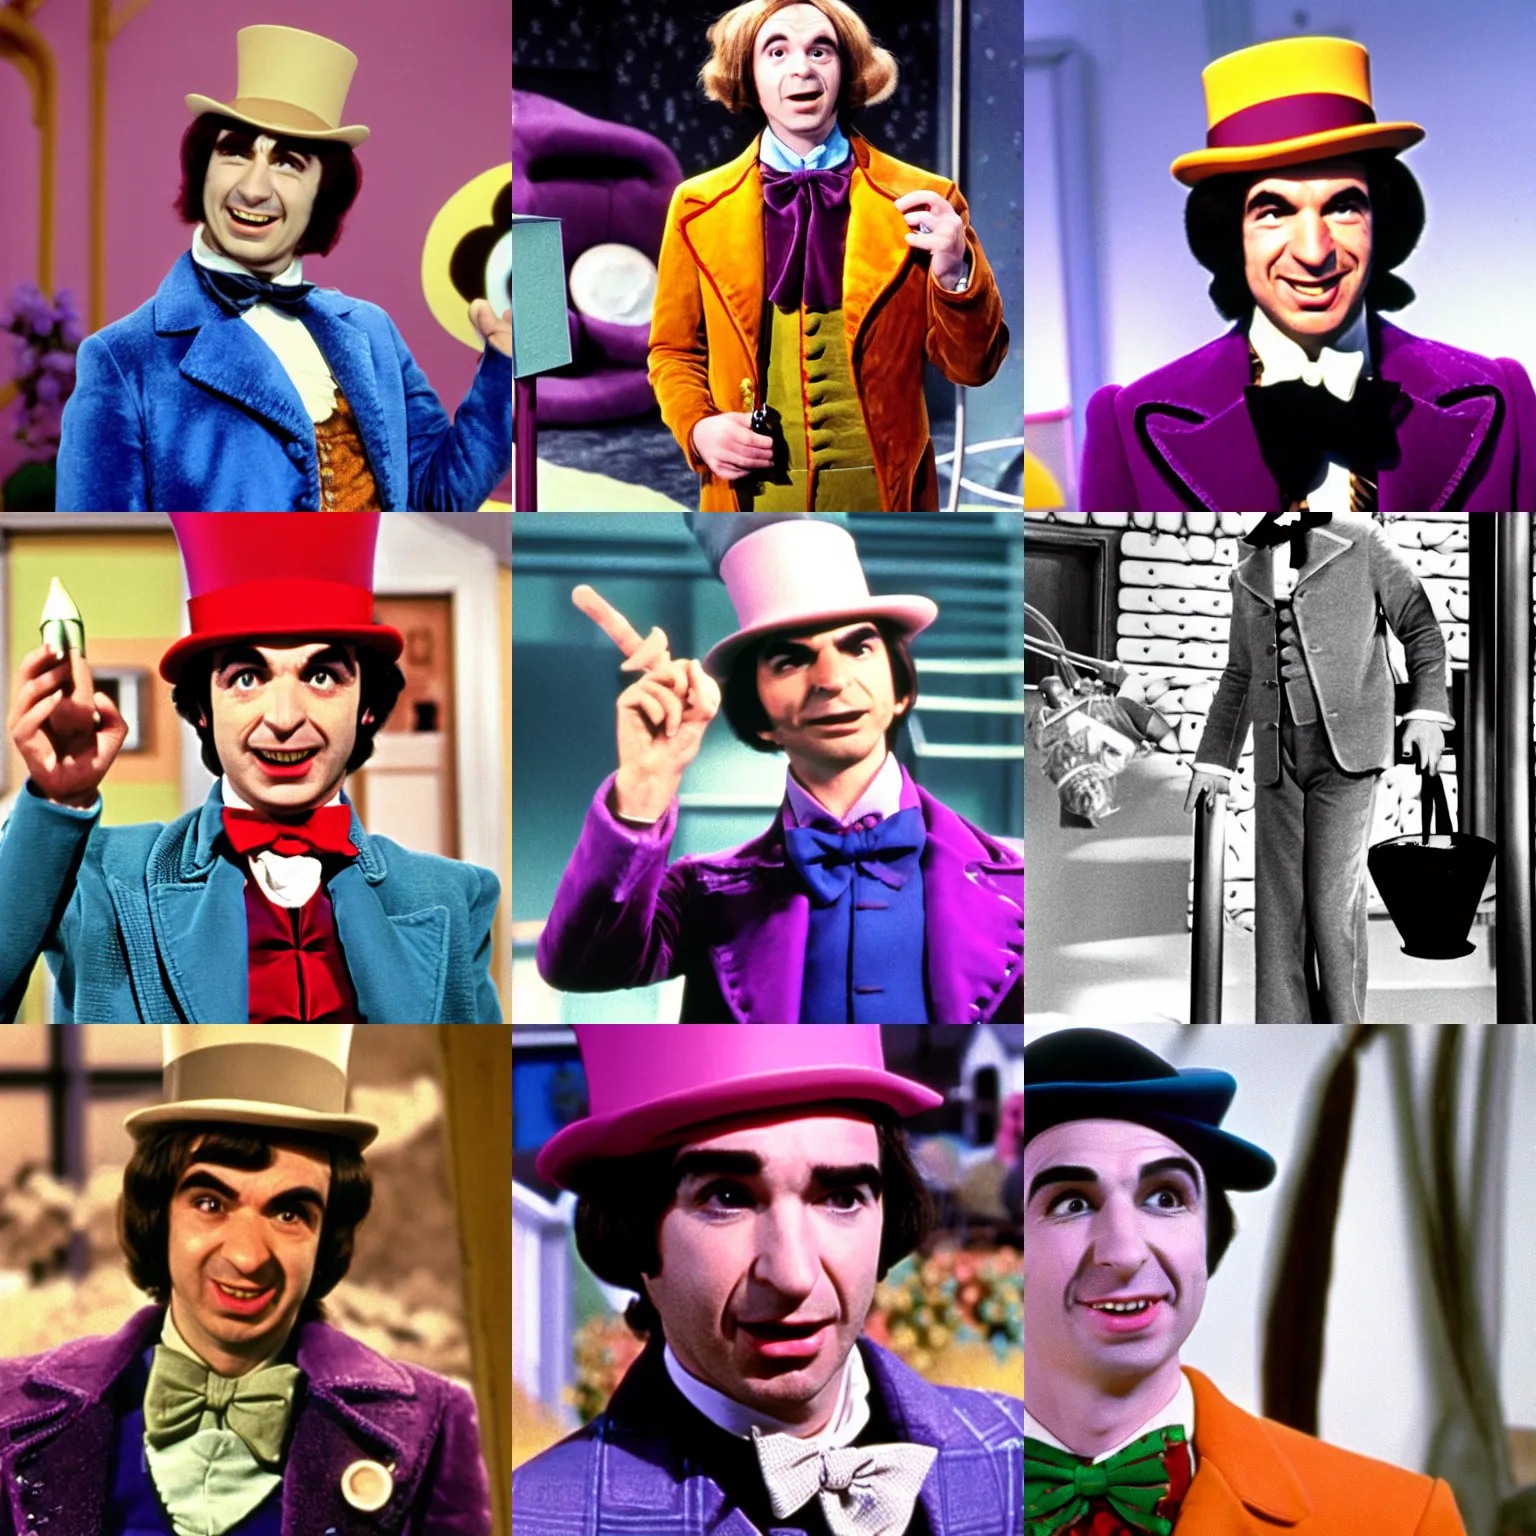 Prompt: nathan fielder as willy wonka in charlie and the chocolate factory (1971)